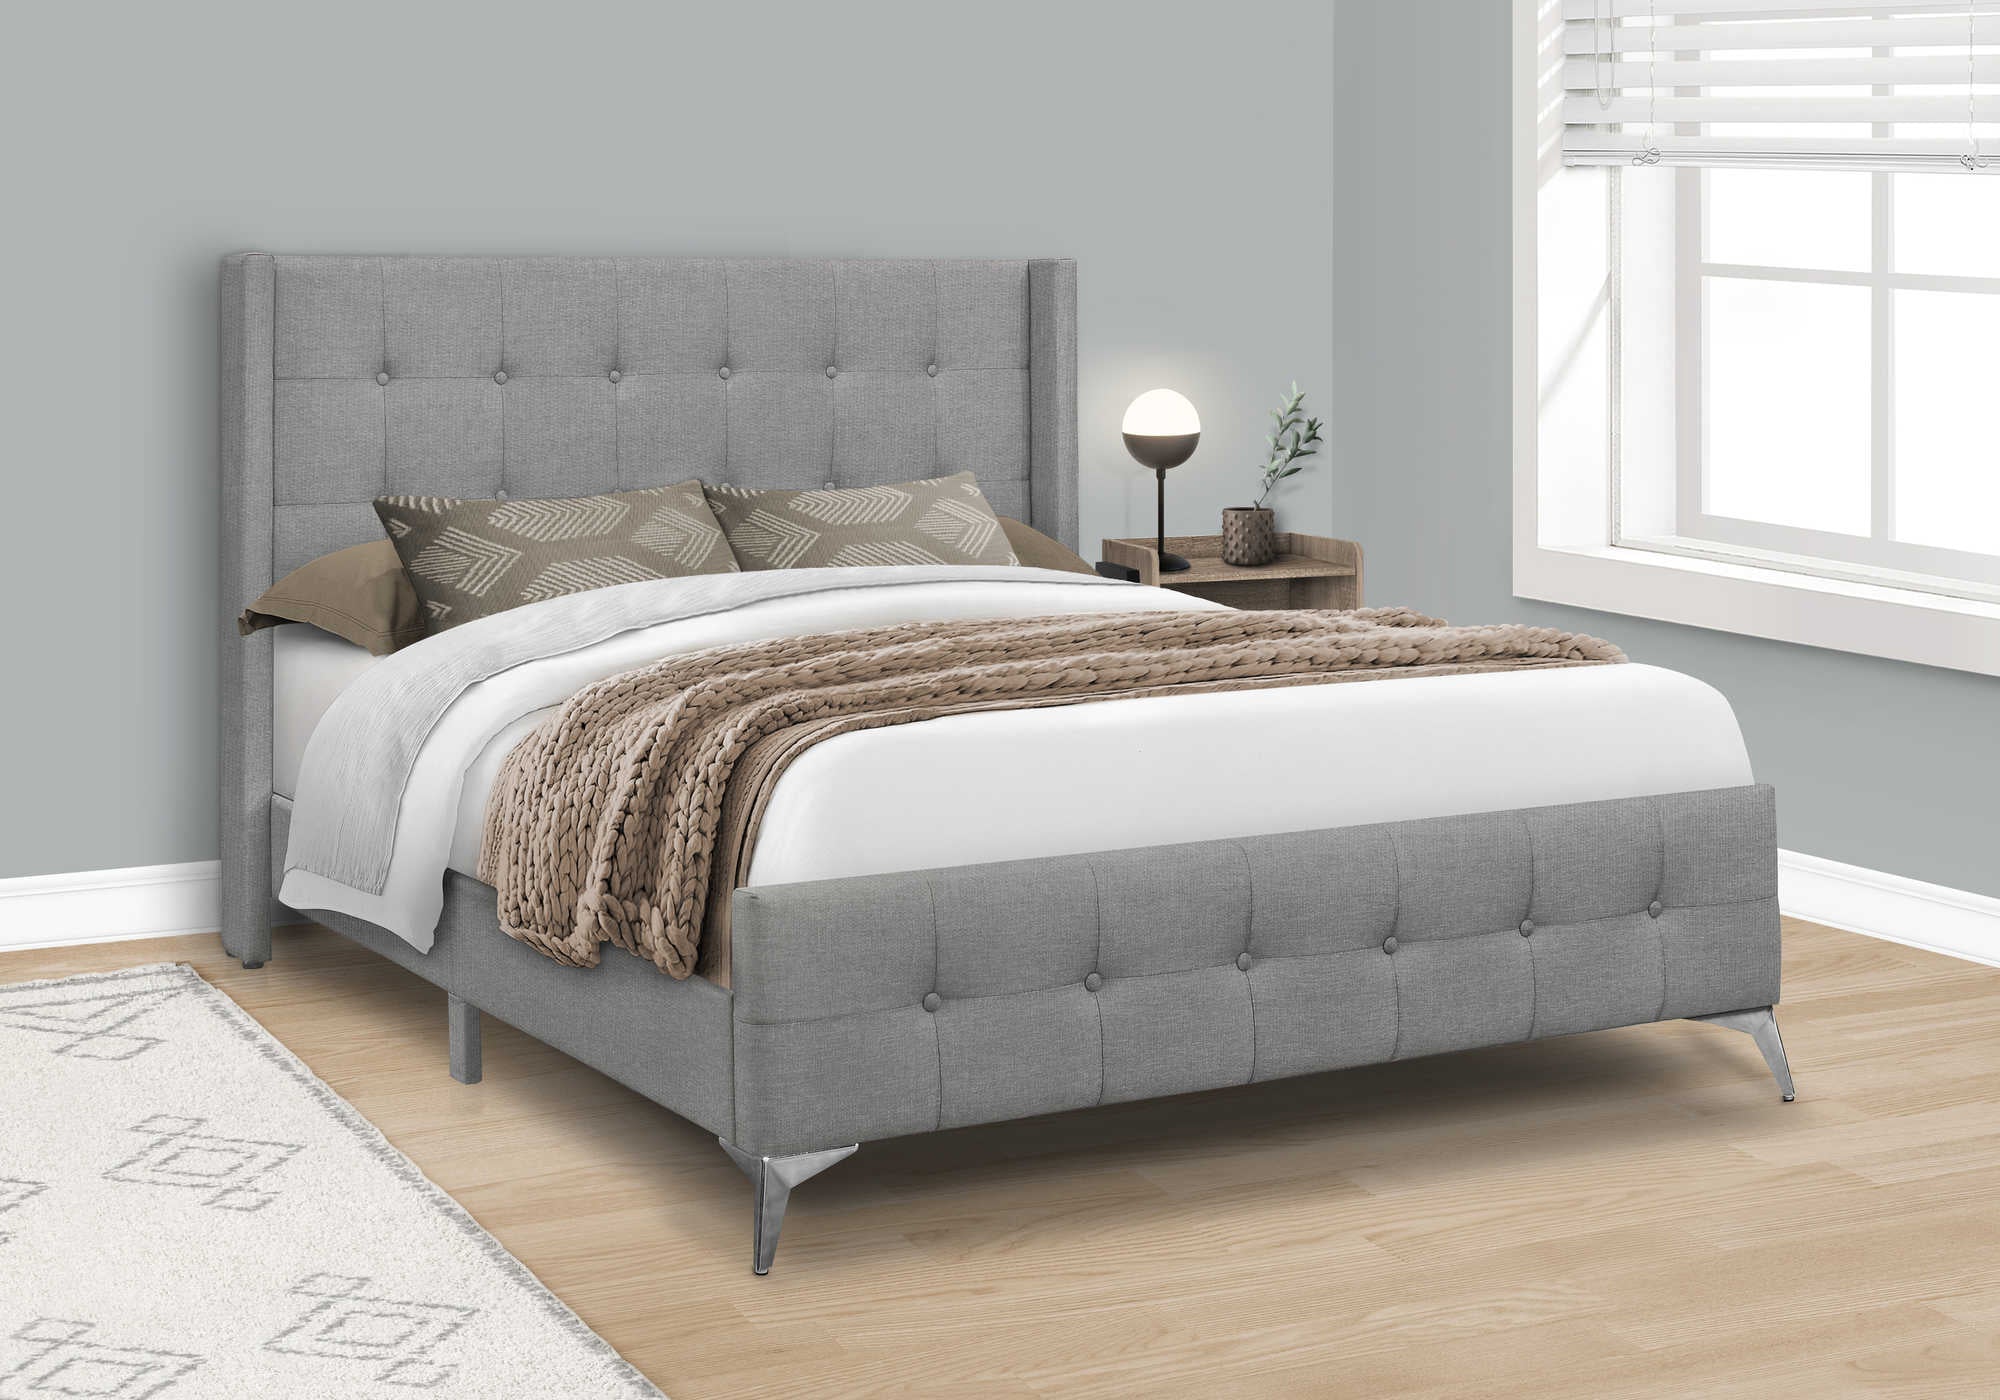 I 6040Q - BED - QUEEN SIZE / GREY LINEN WITH CHROME METAL LEGS BY MONARCH SPECIALTIES INC